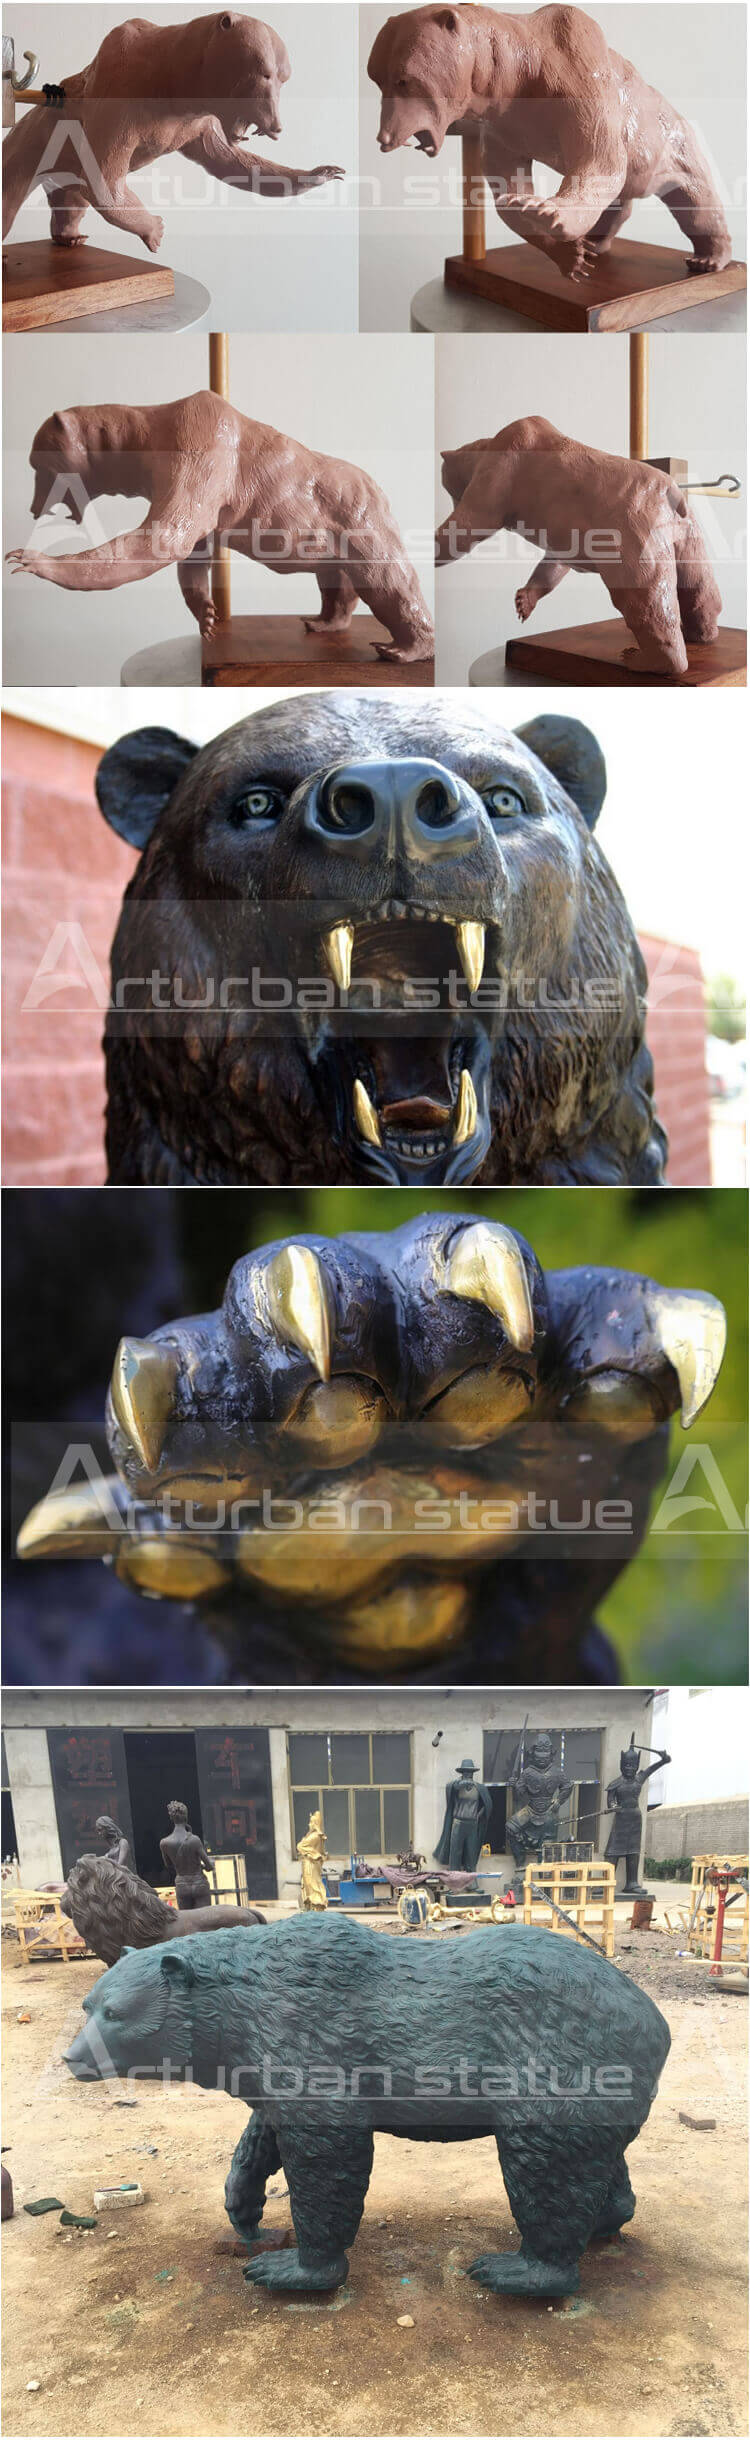 project-cases of bear statue